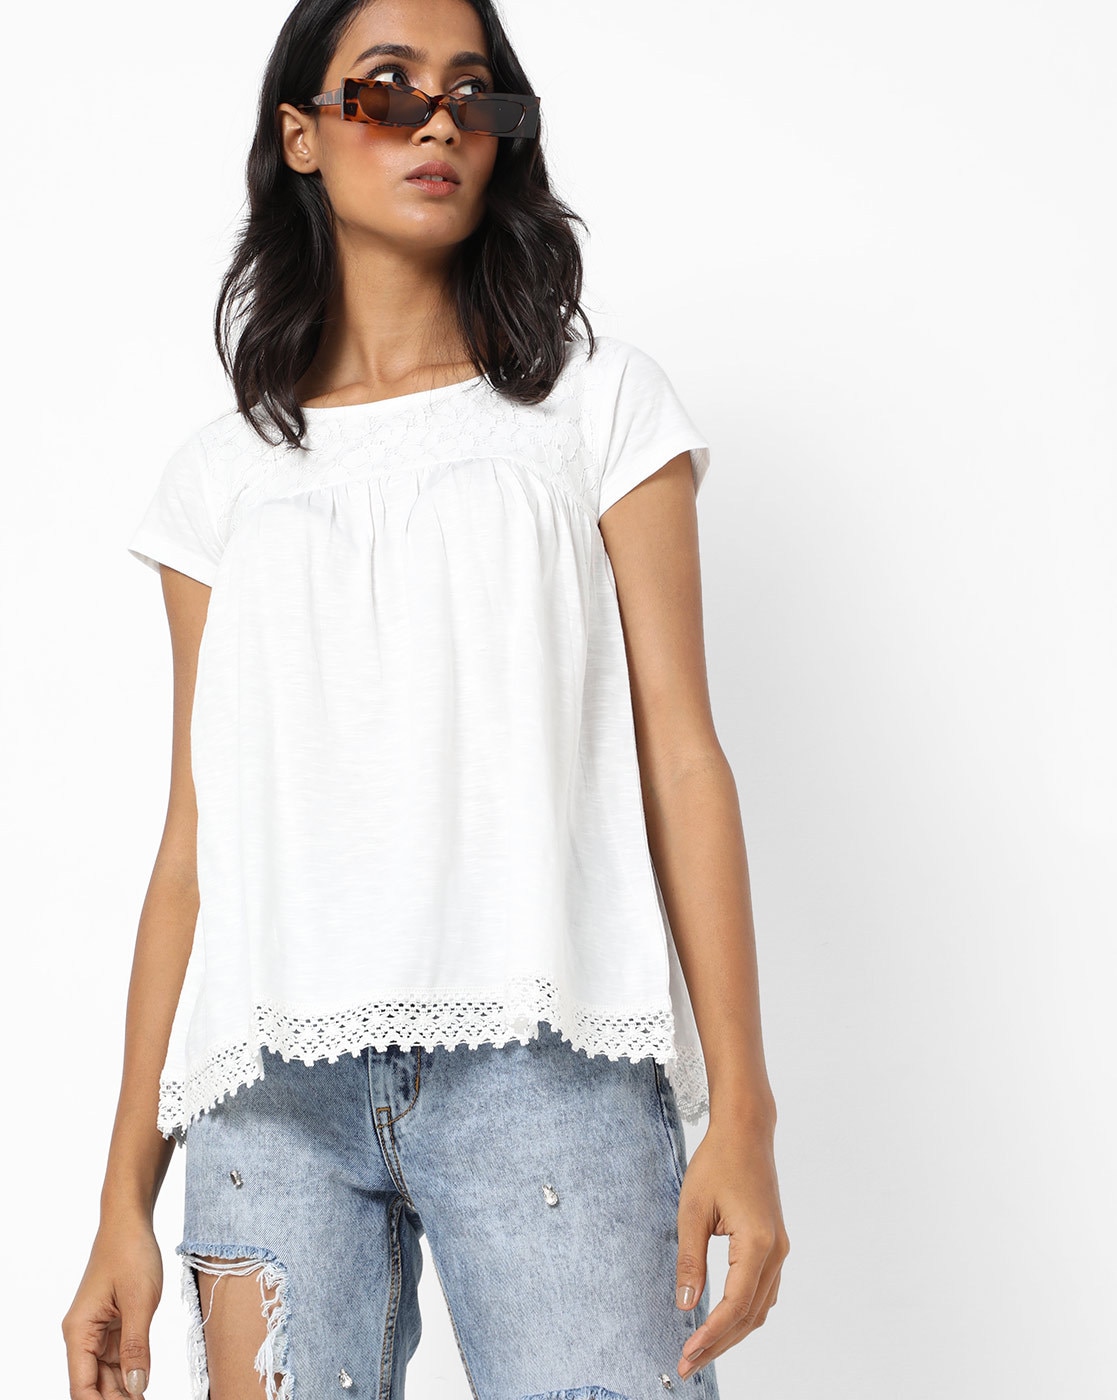 online jeans and top